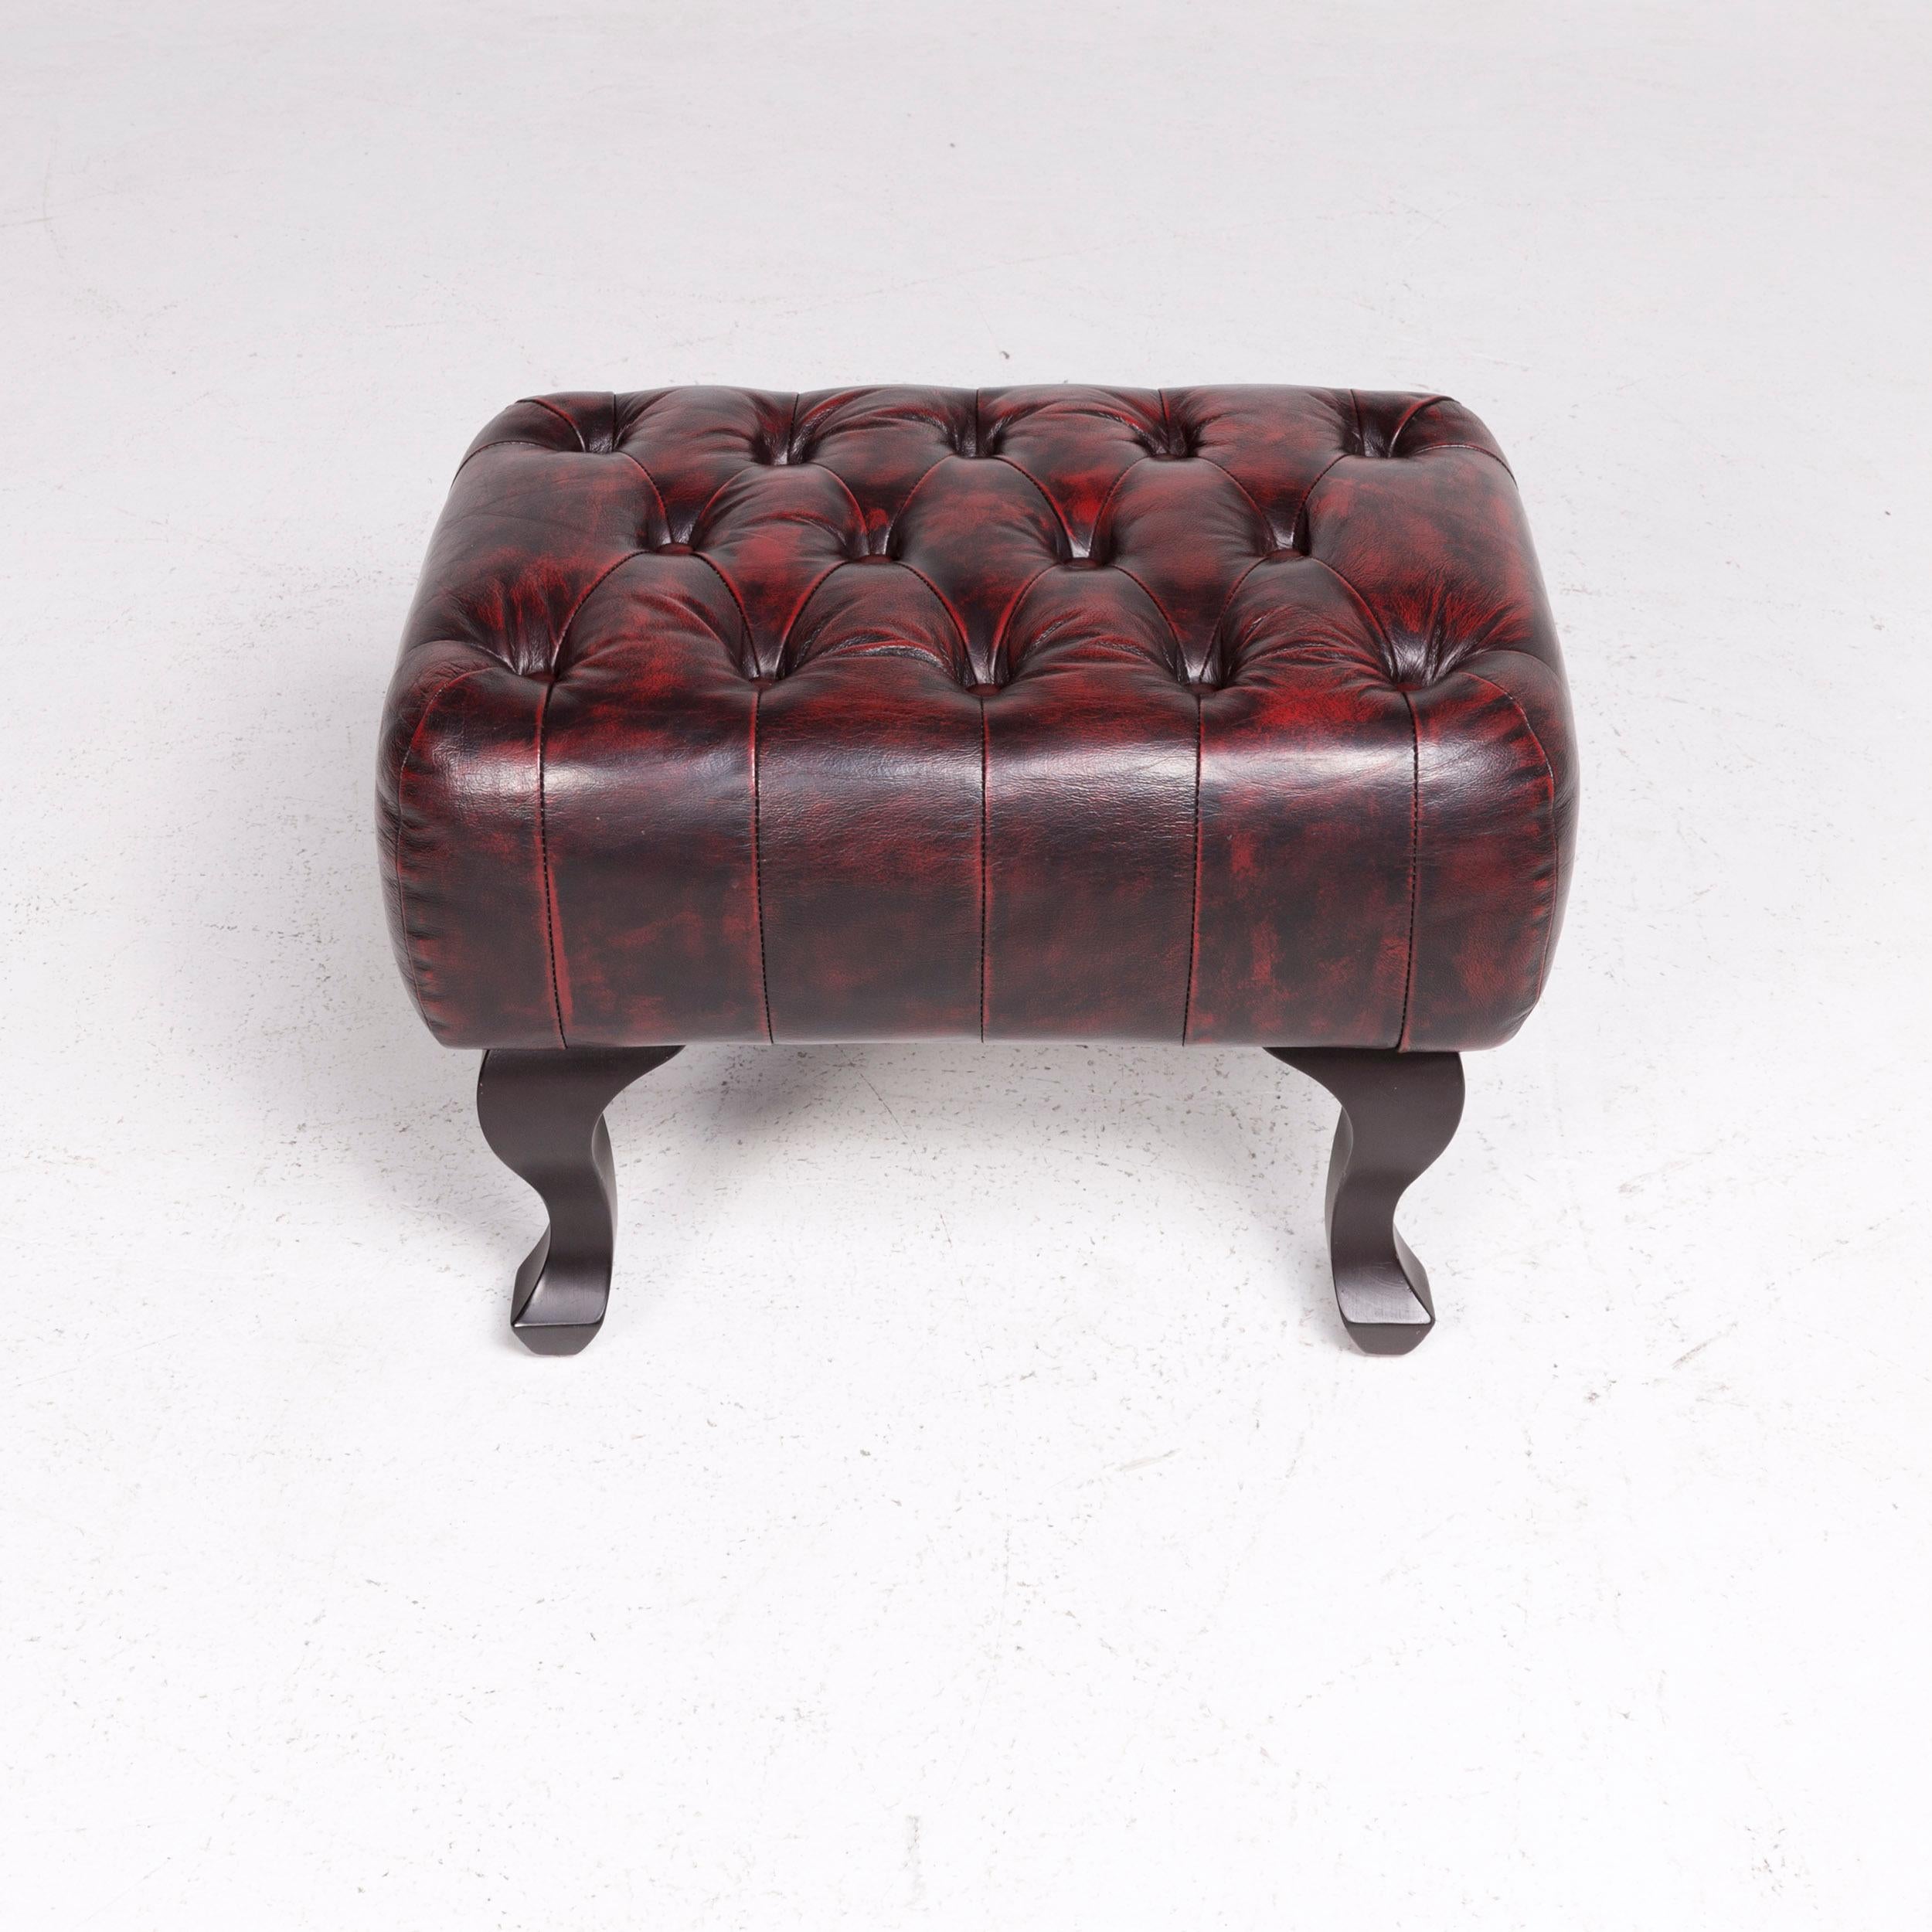 Contemporary Chesterfield Leather Stool Red Genuine Leather Stool Vintage Retro For Sale